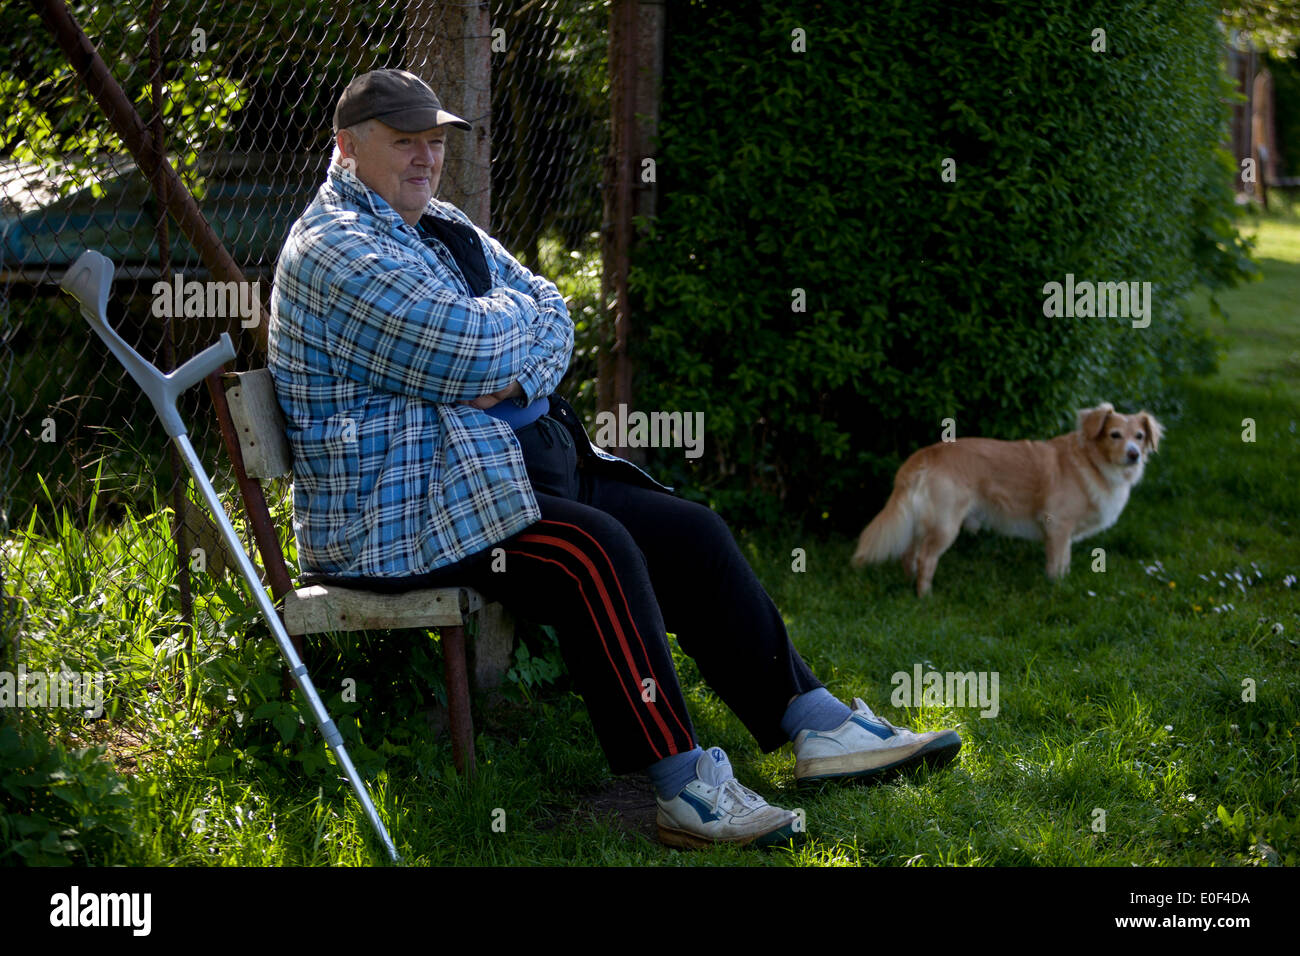 Senior man on a bench with a dog Czech Republic Stock Photo